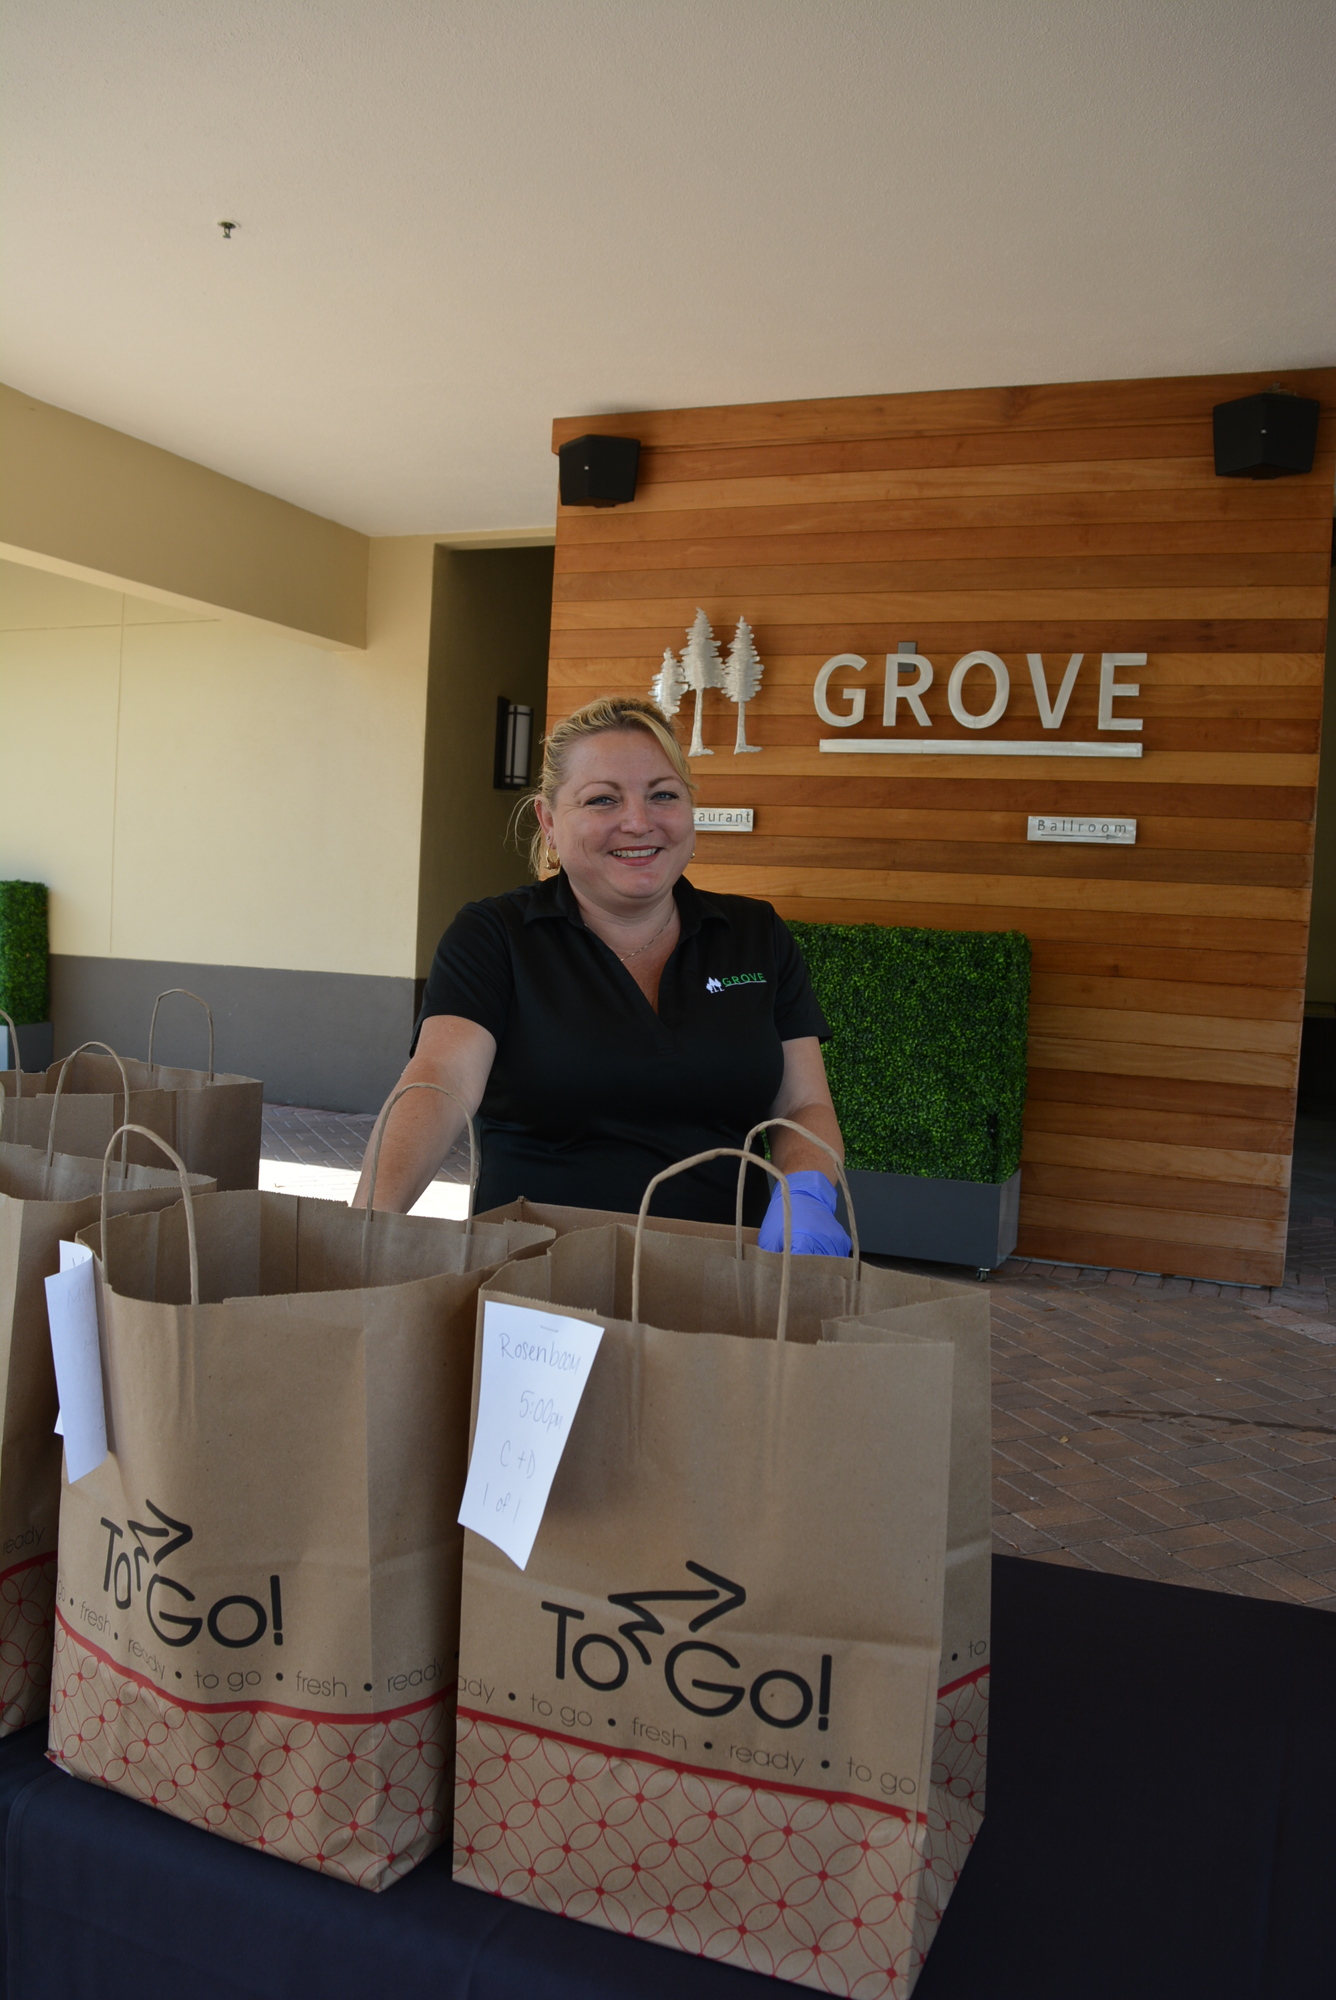 Grove server Delilah Donoho delivers dry goods for customers using the restaurant's online market offering.